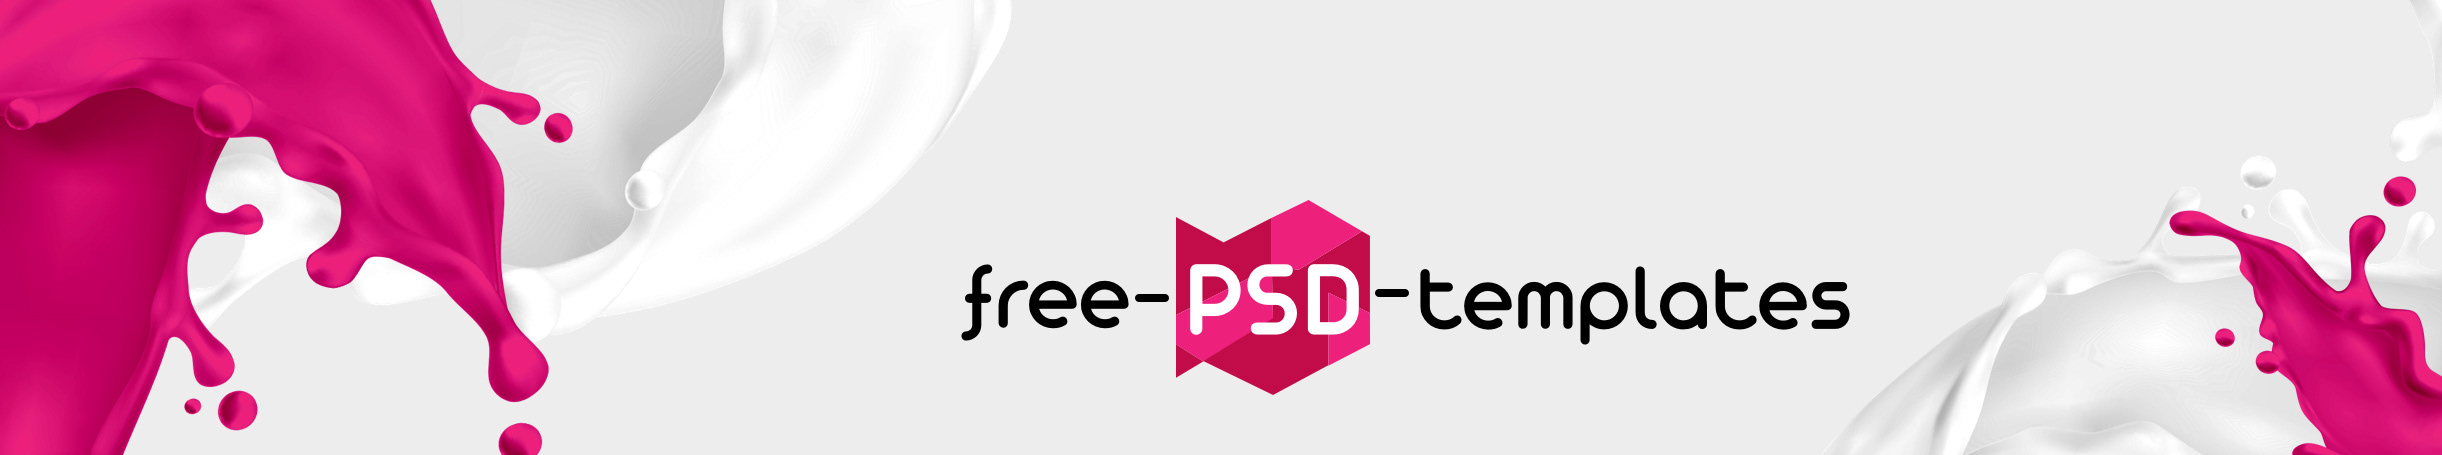 Free Mockups and Templates in PSD's profile banner